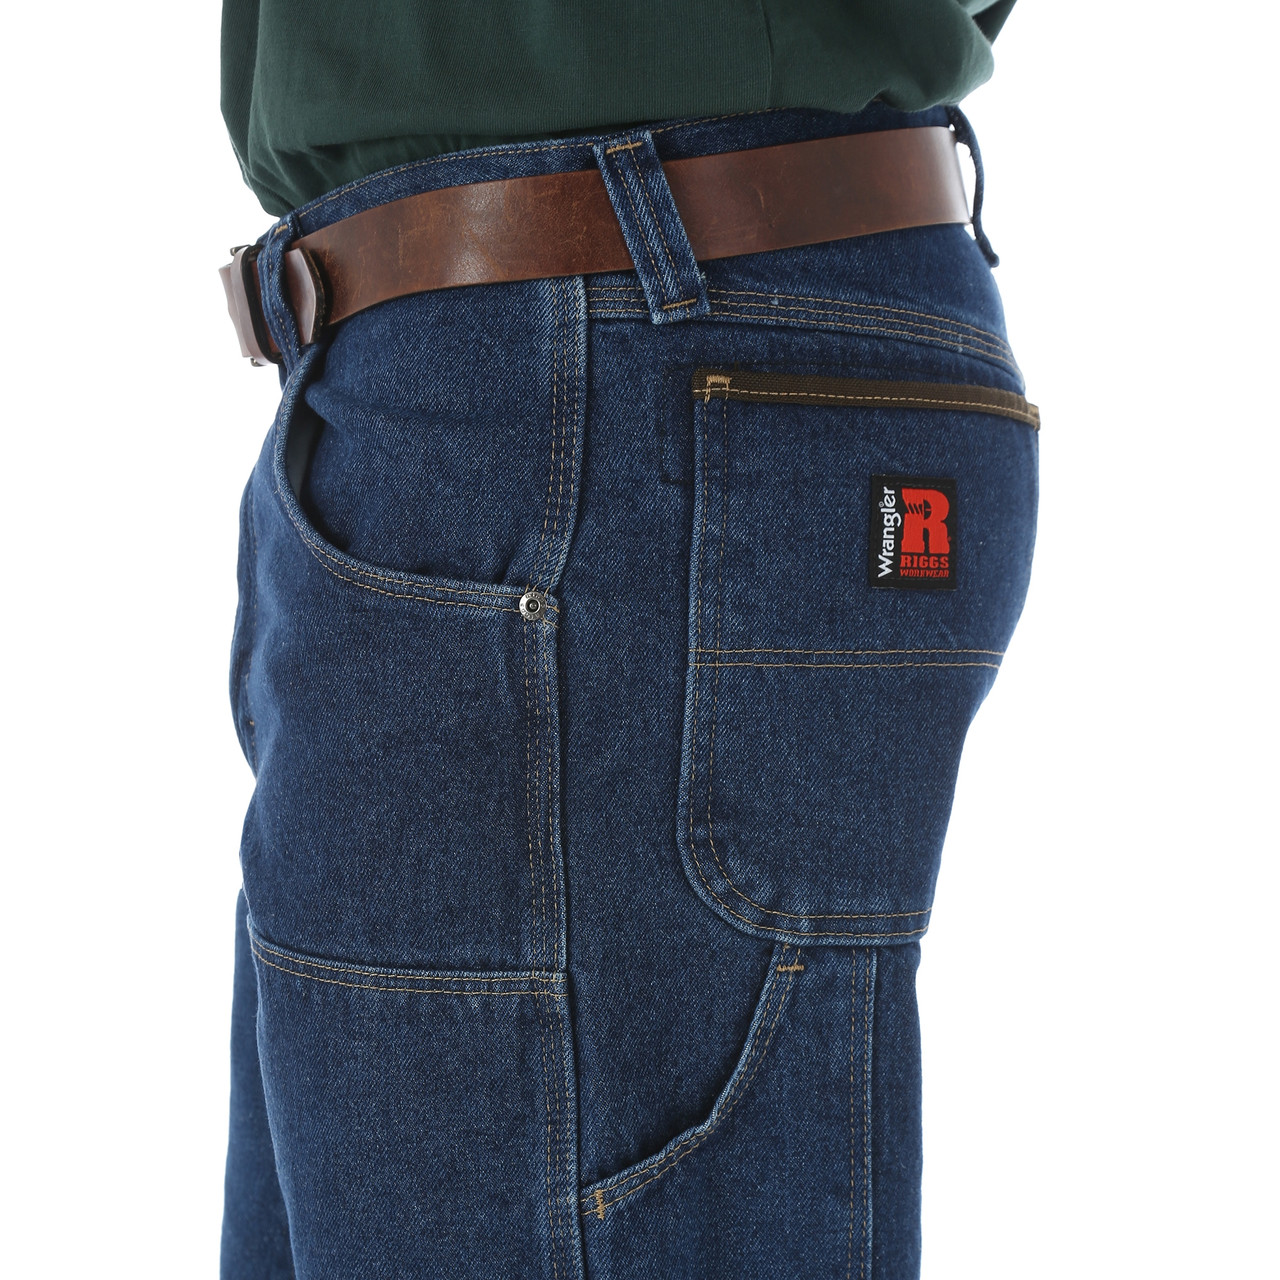 3W030AI Wrangler Riggs Workwear Utility Jean, Relaxed Fit, Antique ...